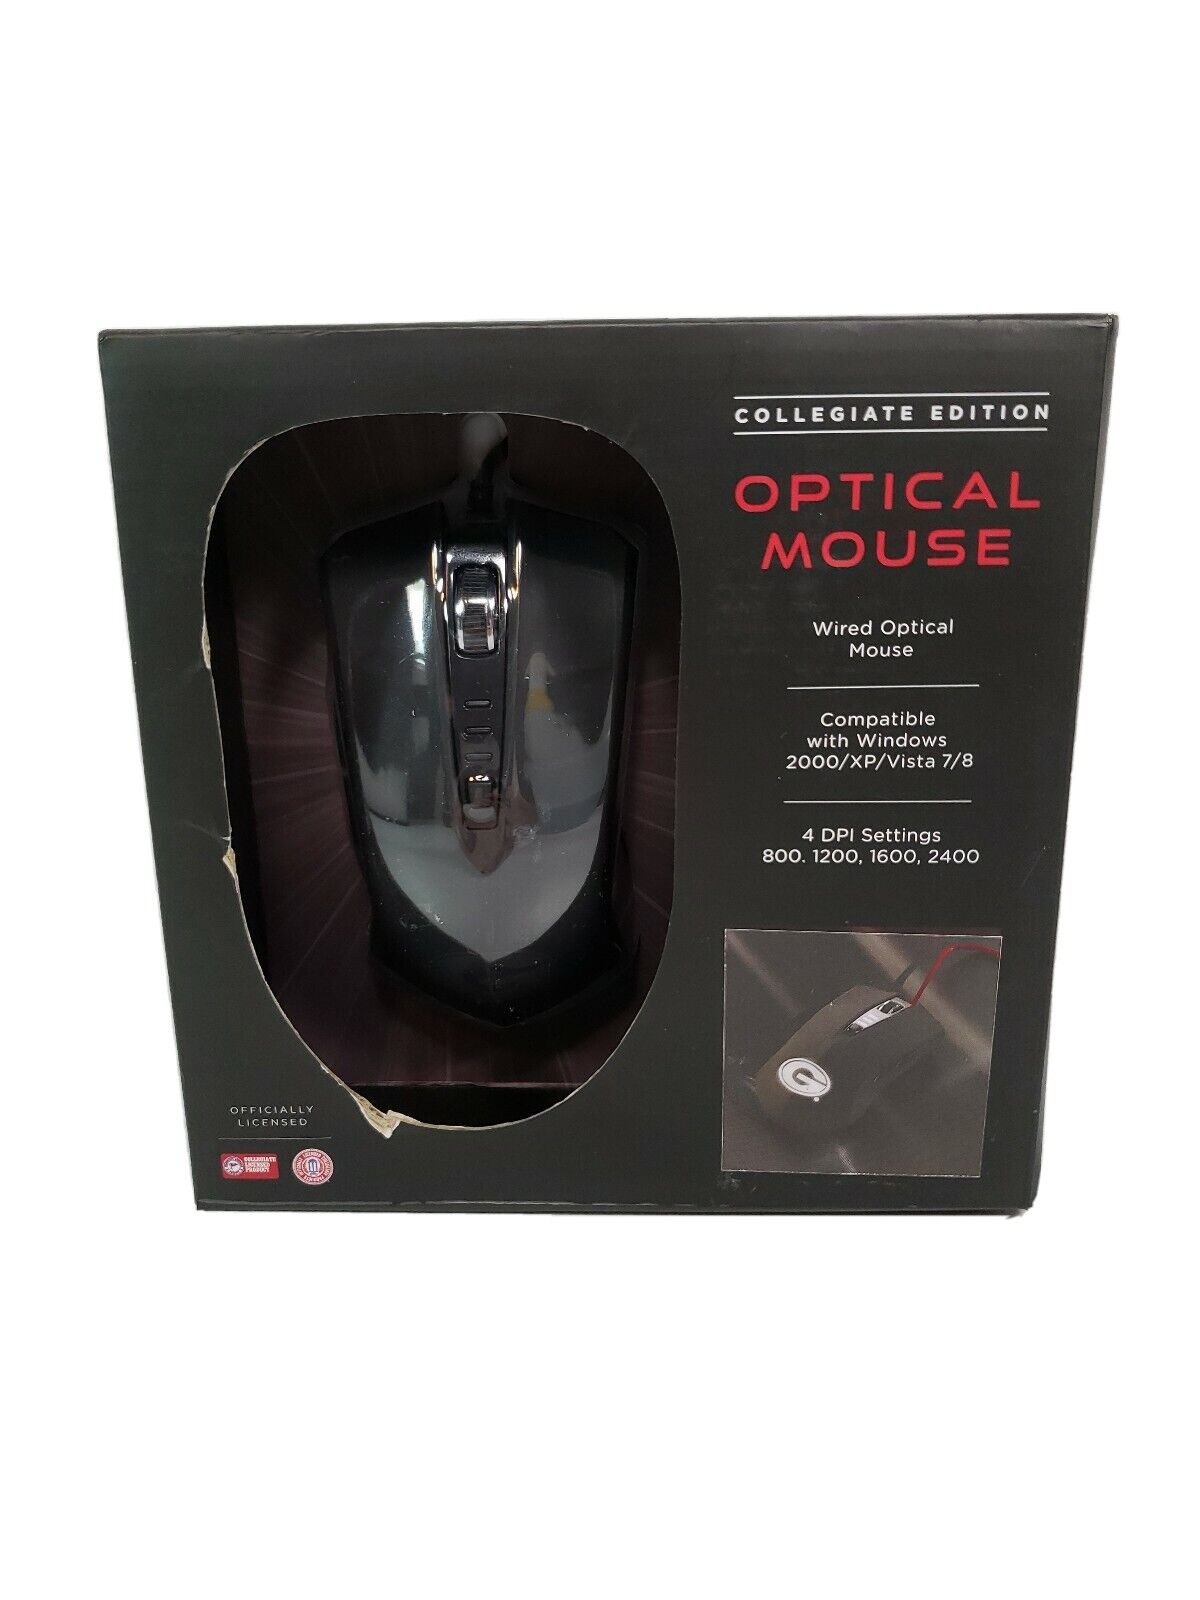 University of Georgia UGA Wired Optical Mouse Collegiate Edition w/ LIGHTED LOGO